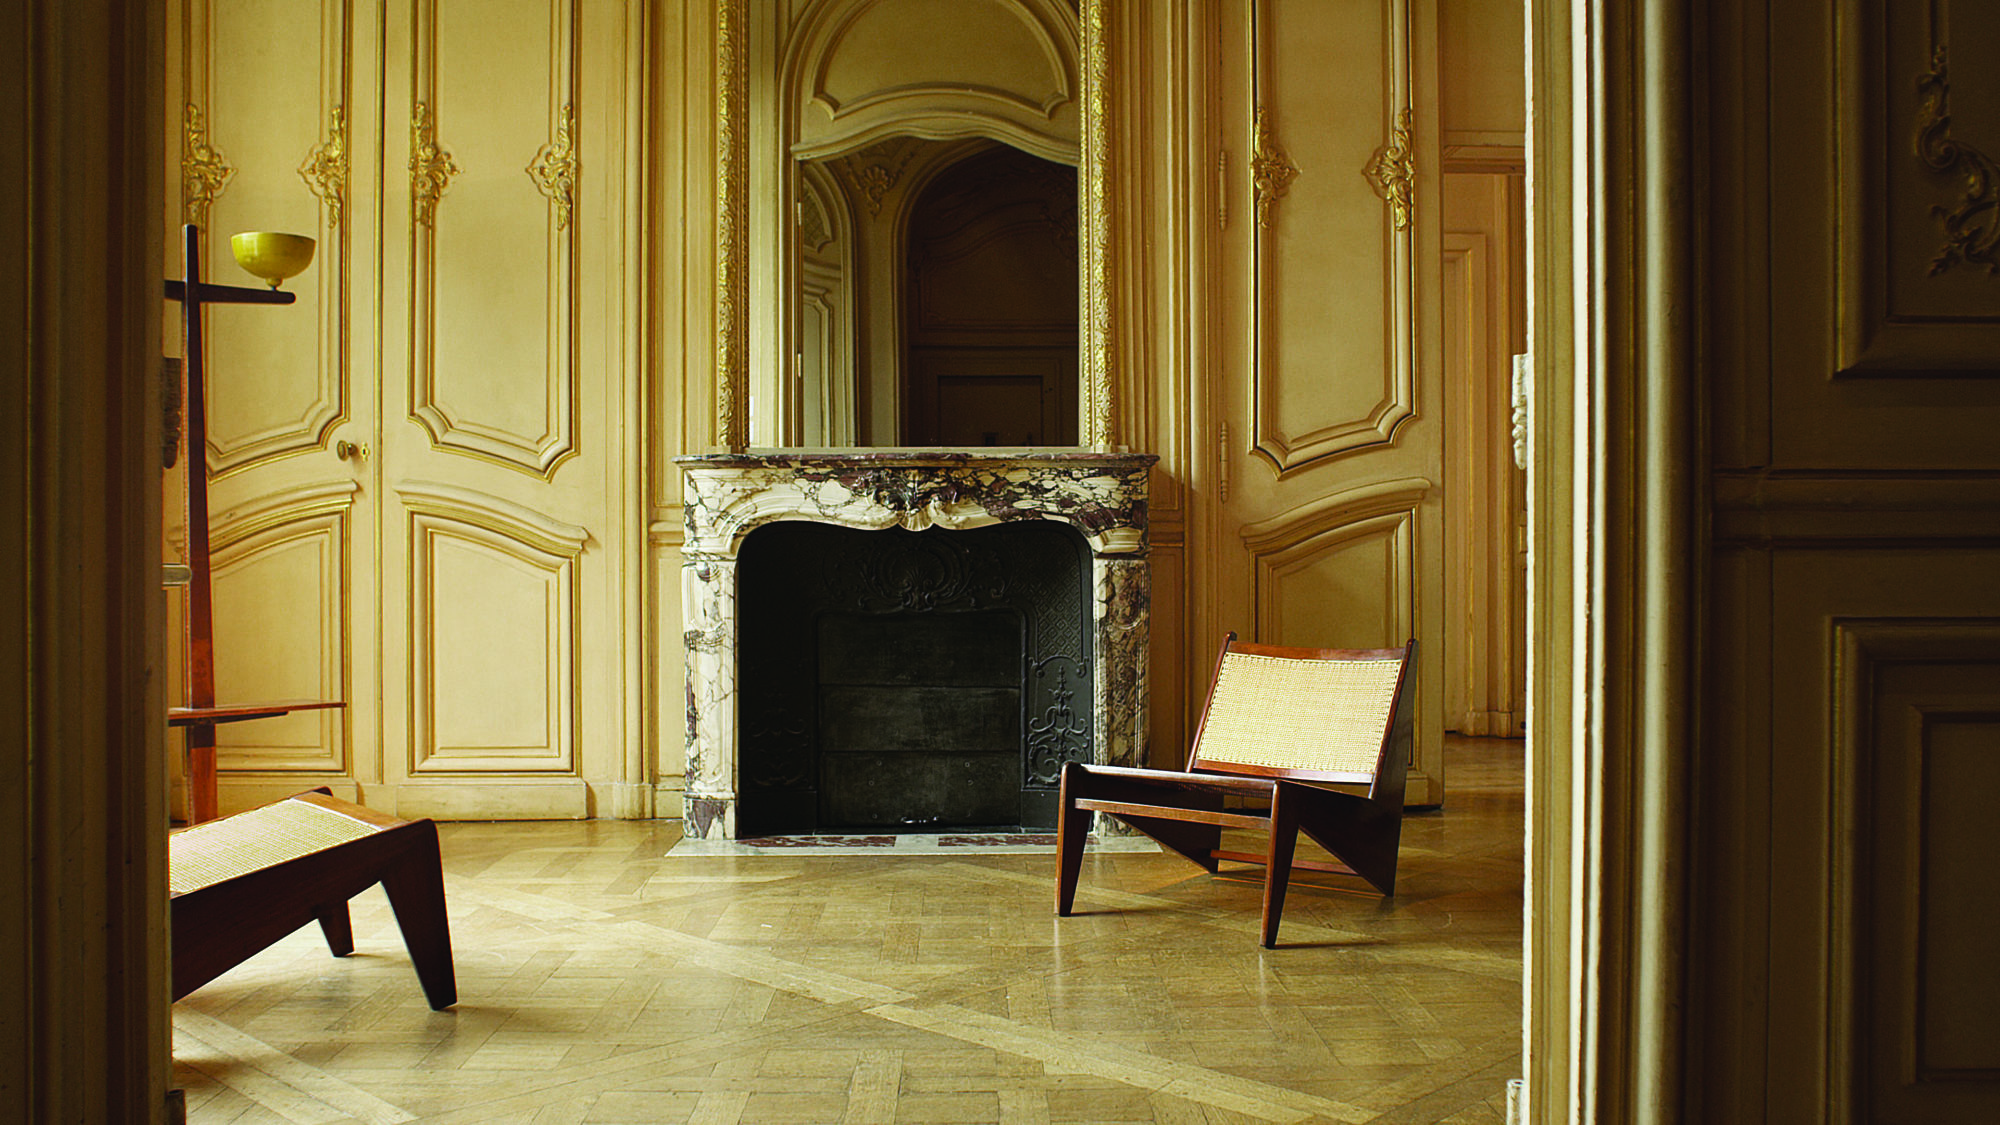 A still from Amie Siegel's Provenance,2013 featuring an empty room.